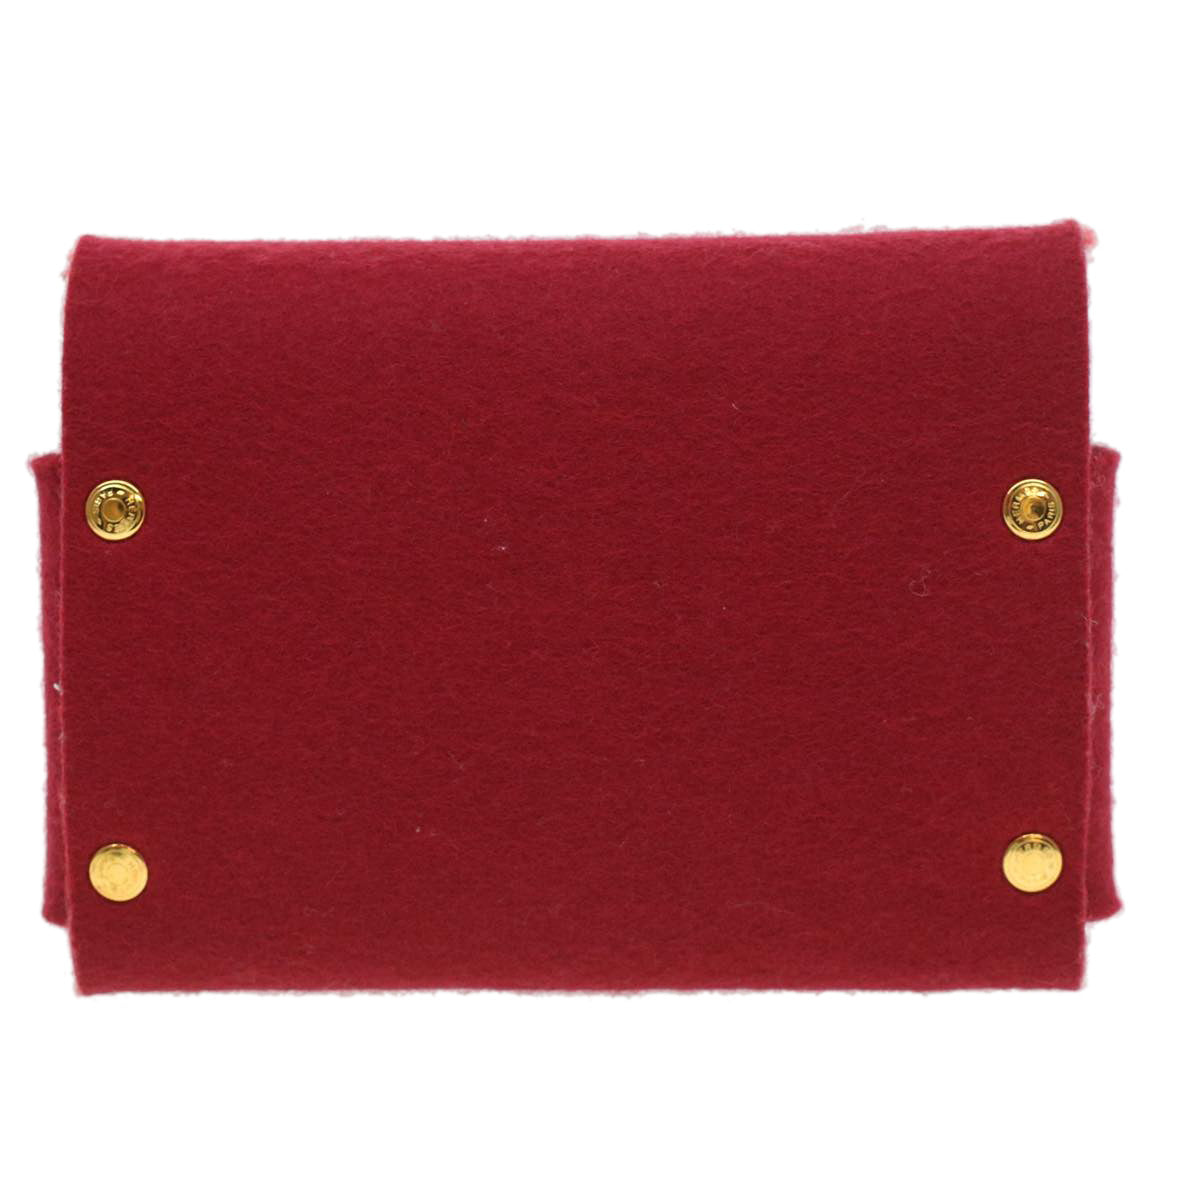 HERMES EtuiCartesGM Card Case Wool Red Auth ar8170